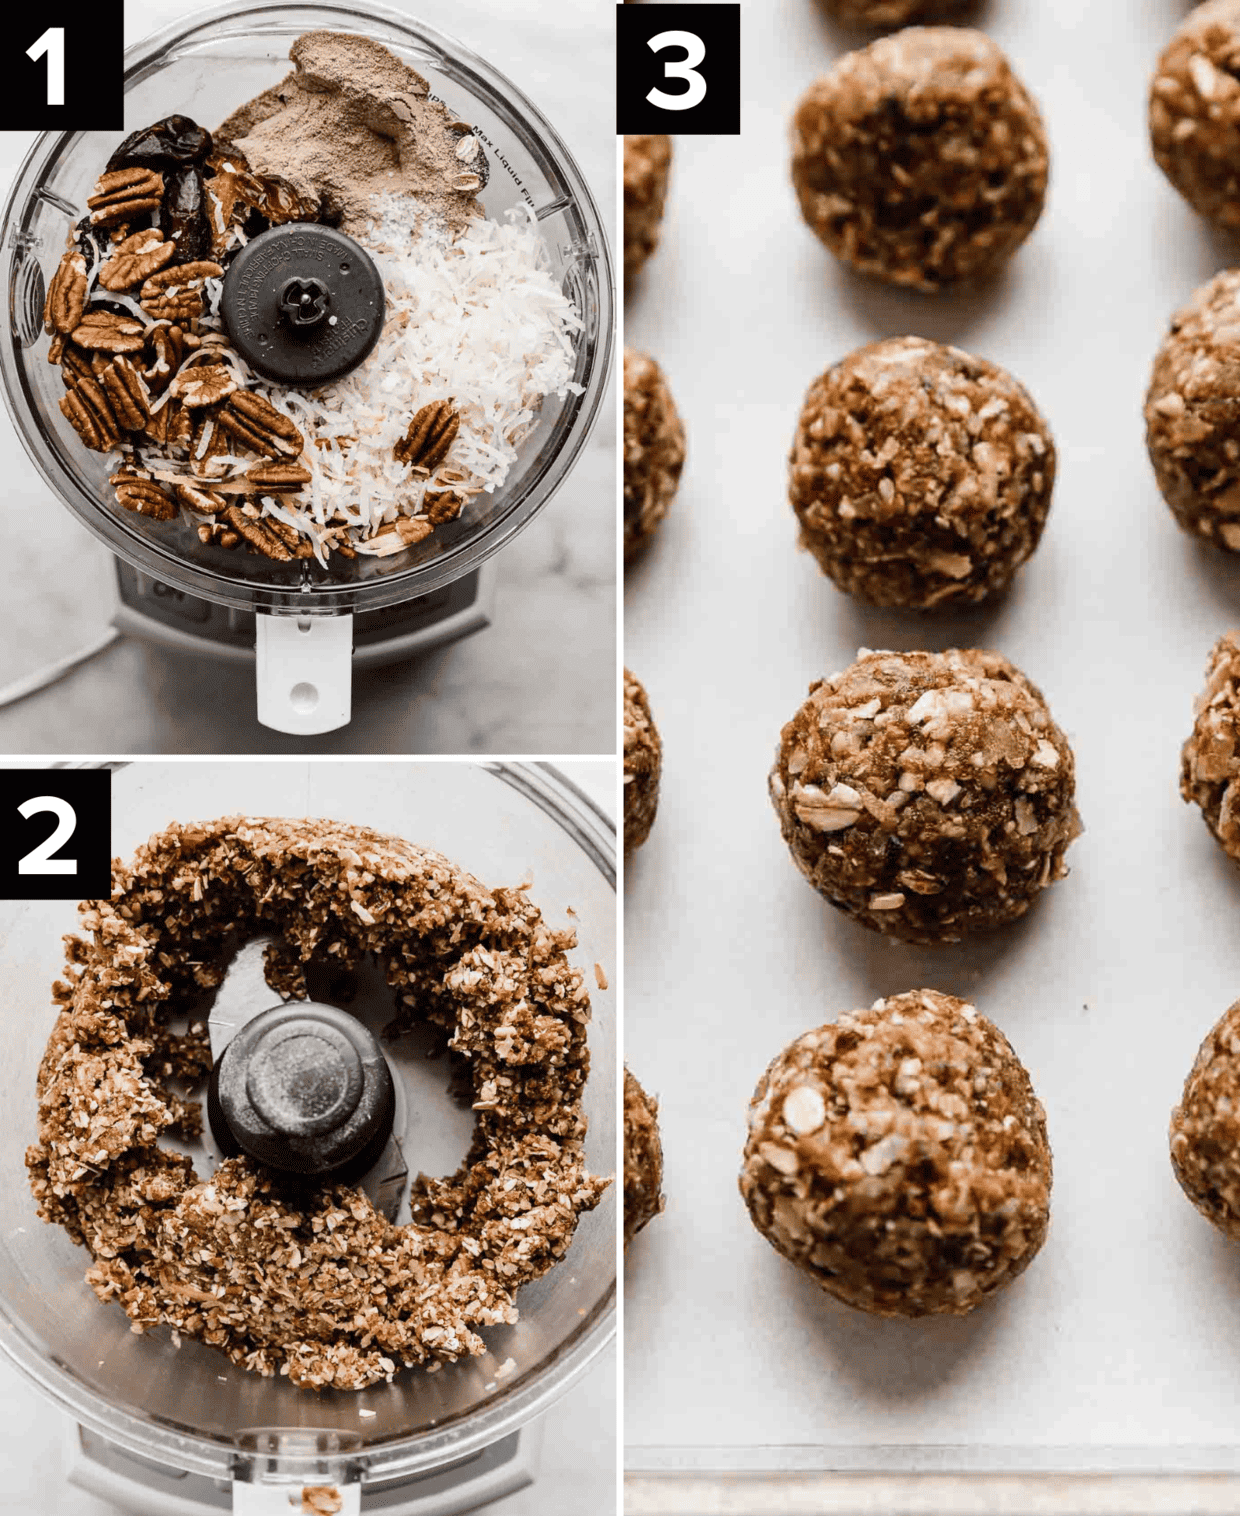 Three images showing how to make German Chocolate balls with protein powder, top left image is German Chocolate Cake Protein Ball ingredients in a food processor, bottom left is all the ingredients ground up, right image is German chocolate balls on a white background.